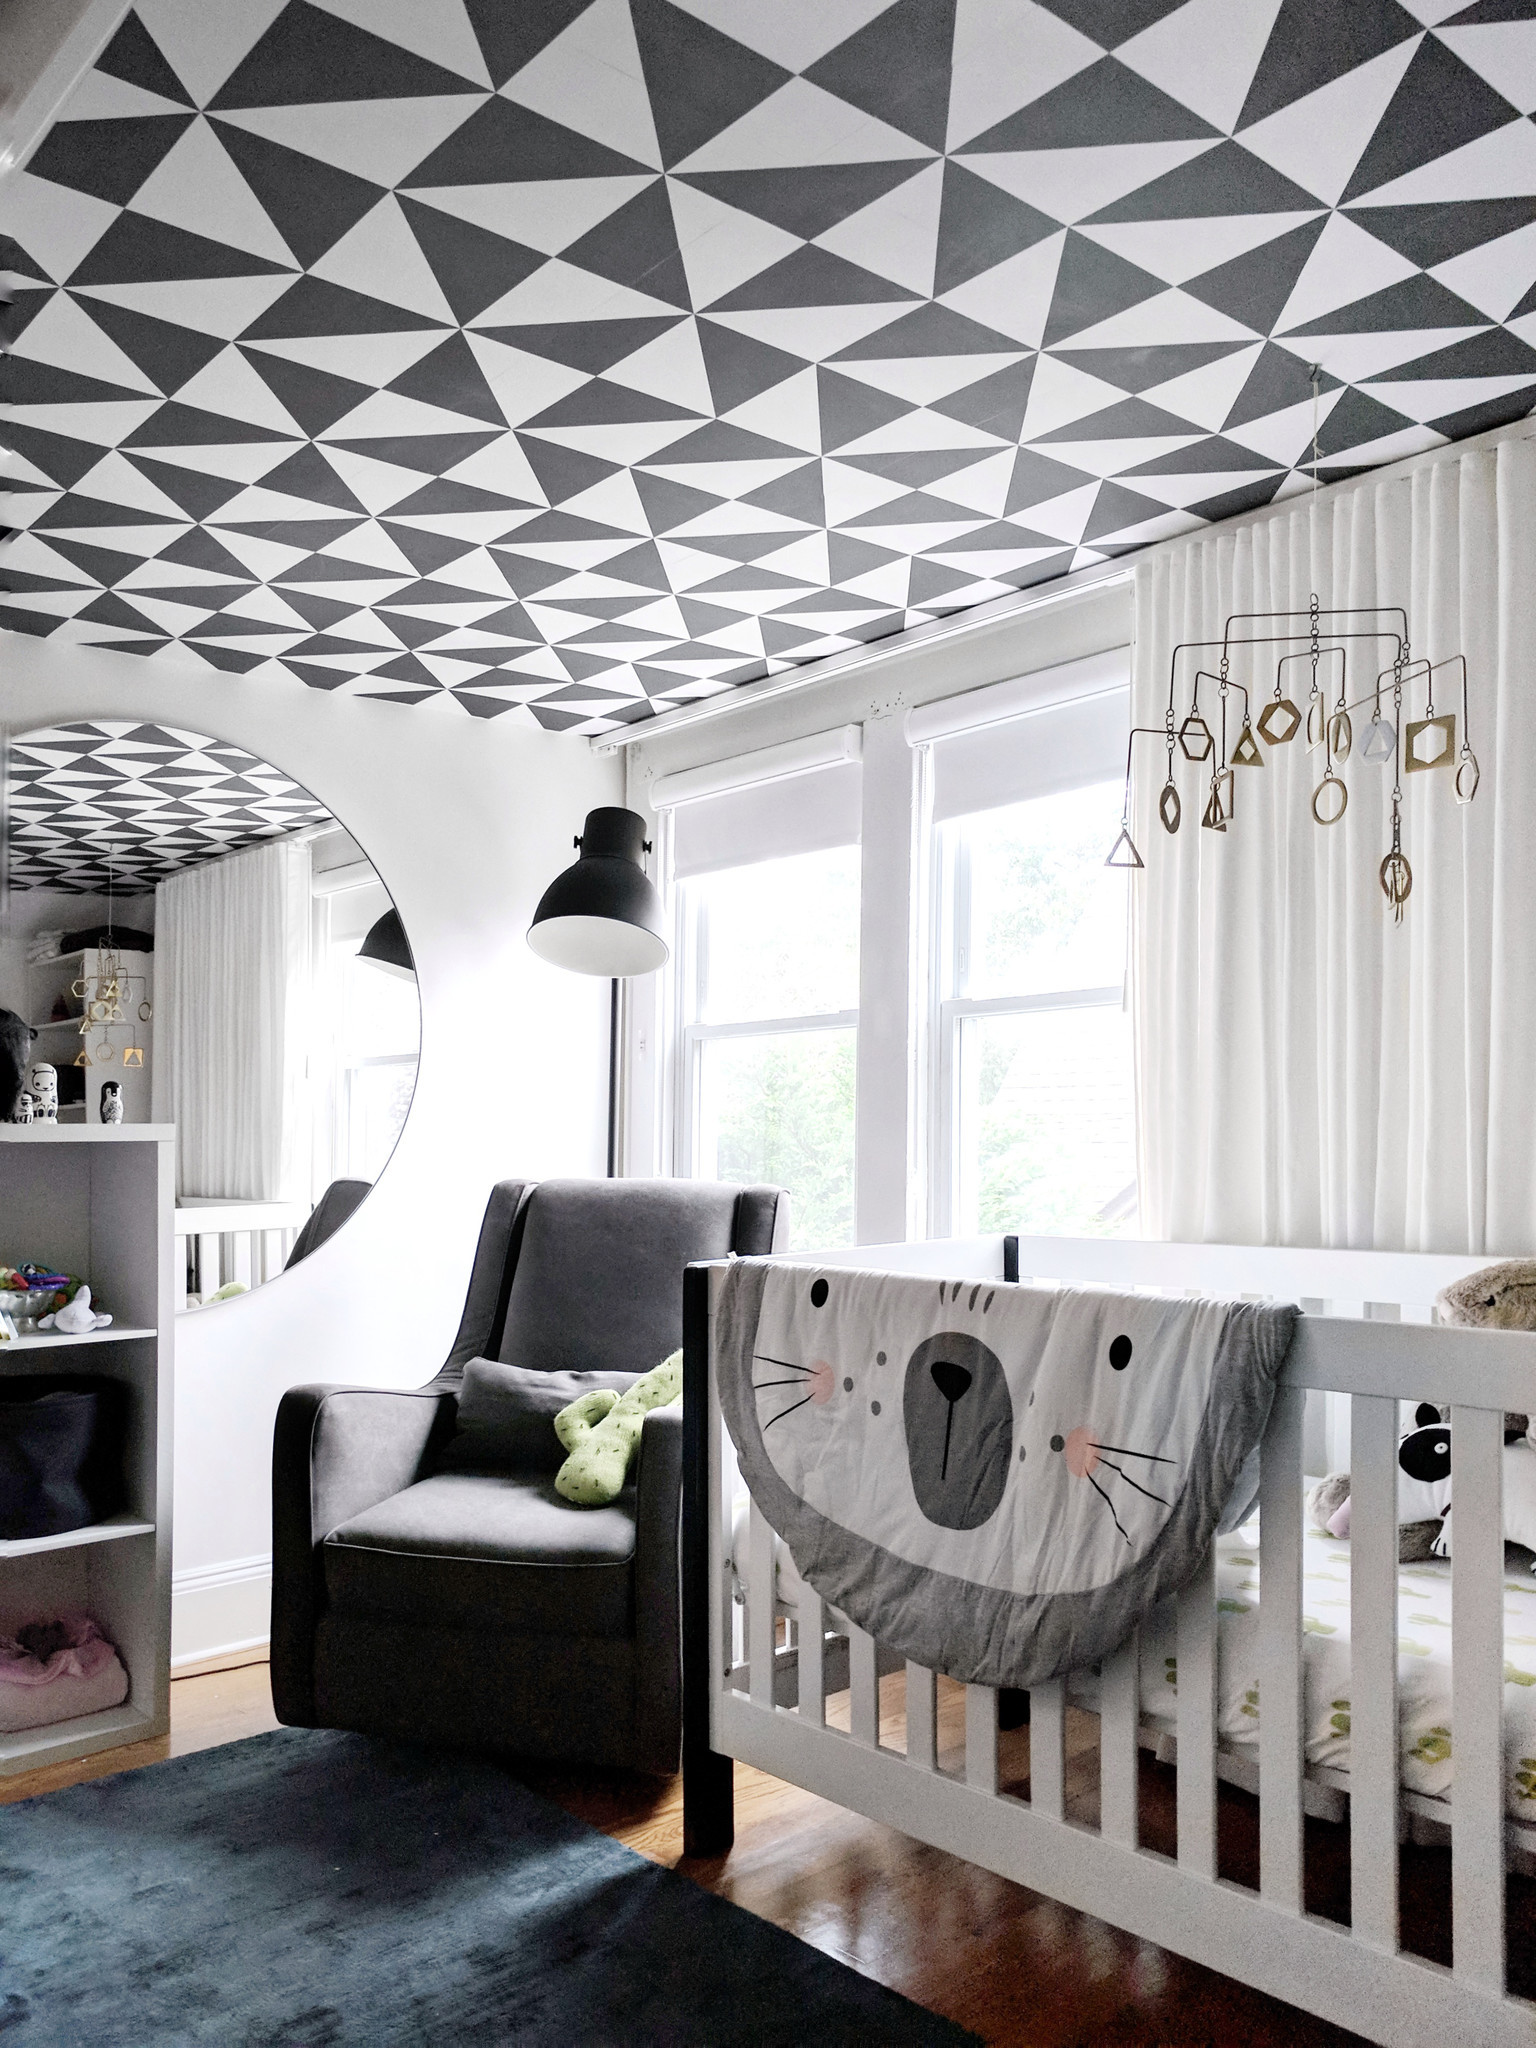 5th Wall: Designer Crystal Sinclair used graphic wallpaper by Chasing Paper on a nursery ceiling. Cr